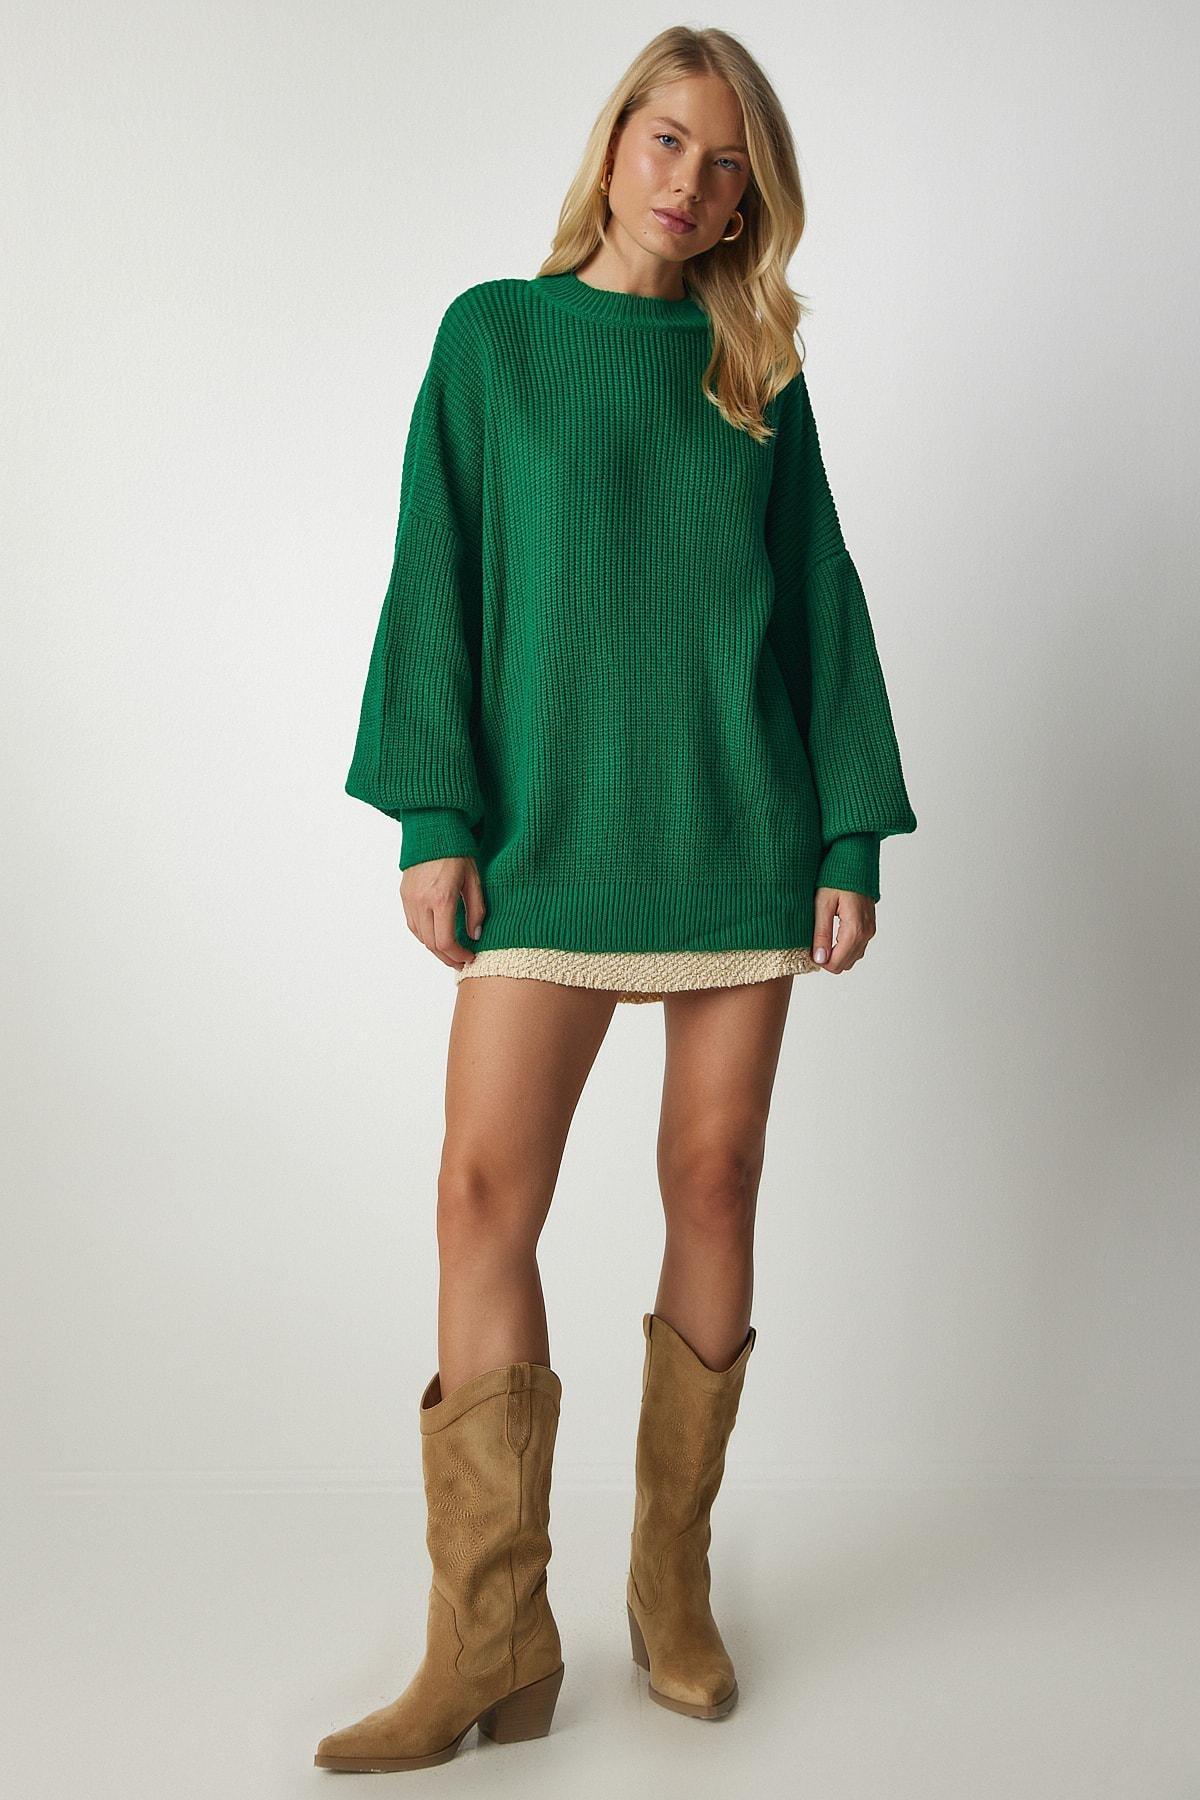 Happiness Istanbul - Green Oversized Knitwear Sweater